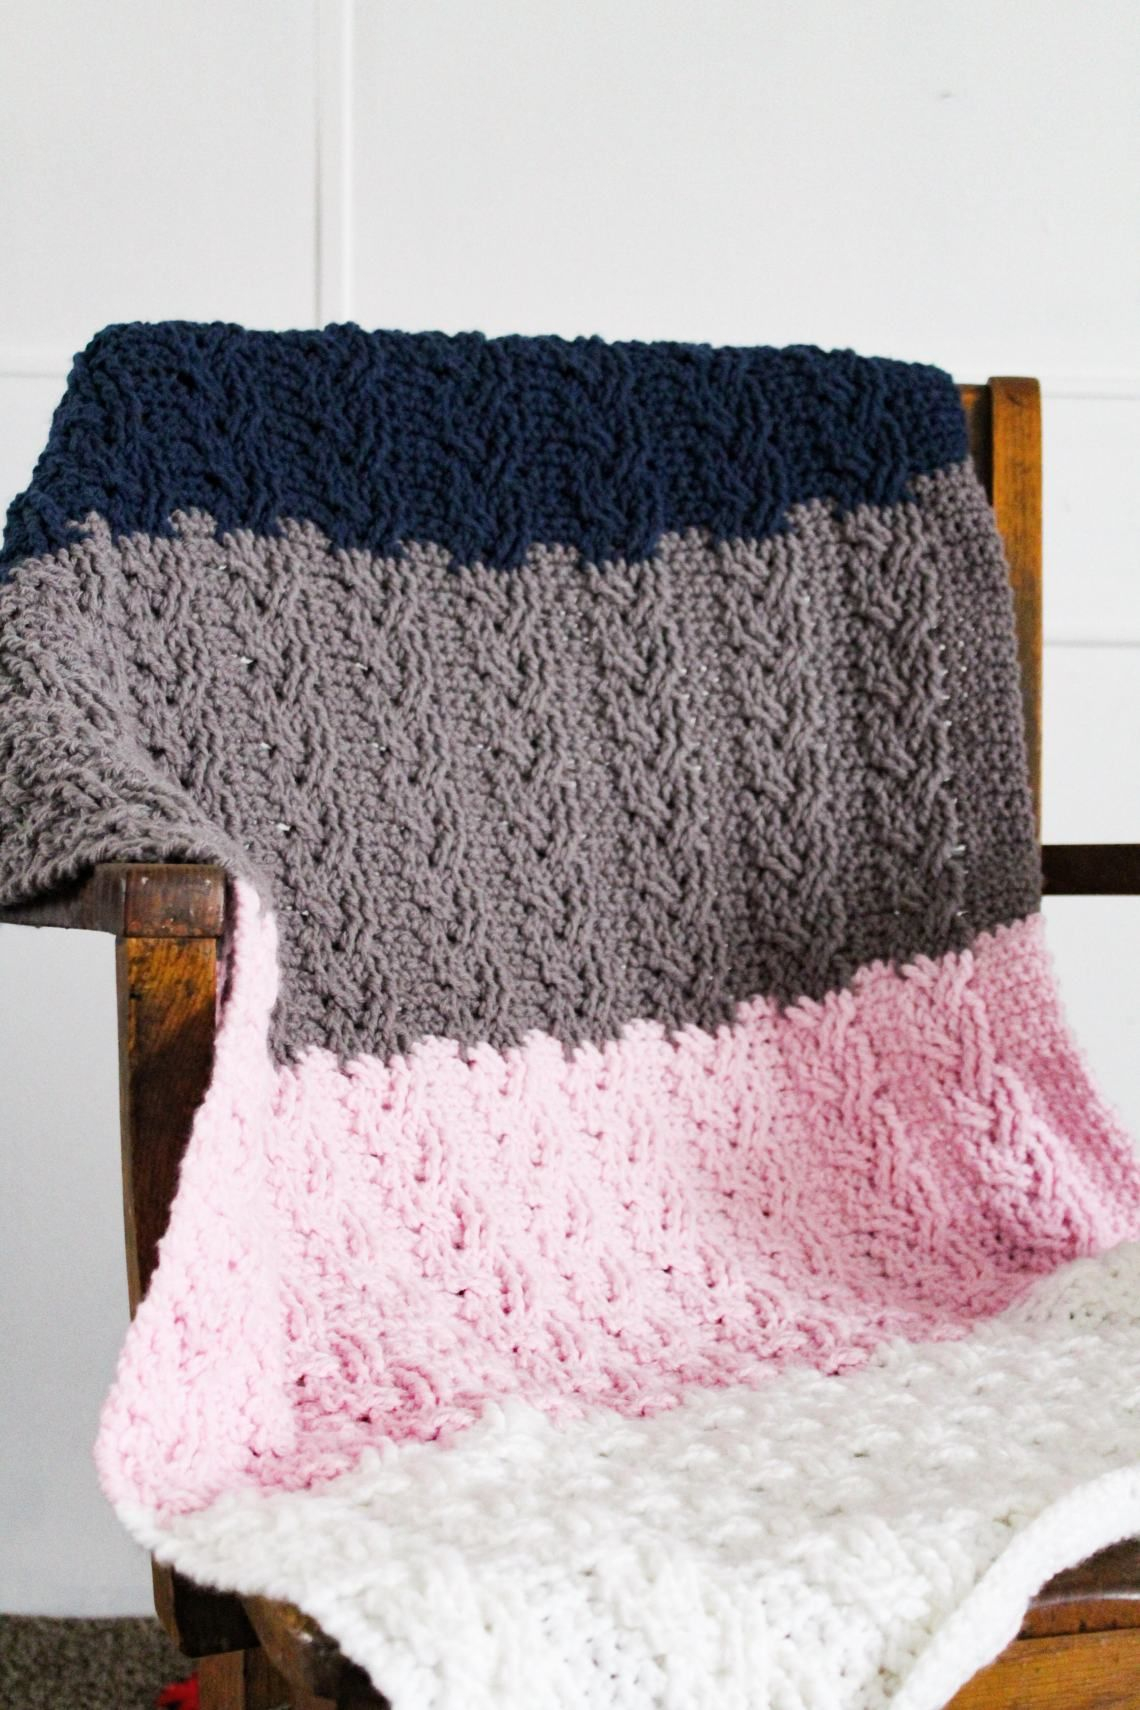 Crochet Throw Patterns Uk The Neapolitan French Braid Crochet Cable Blanket Free Pattern Uk